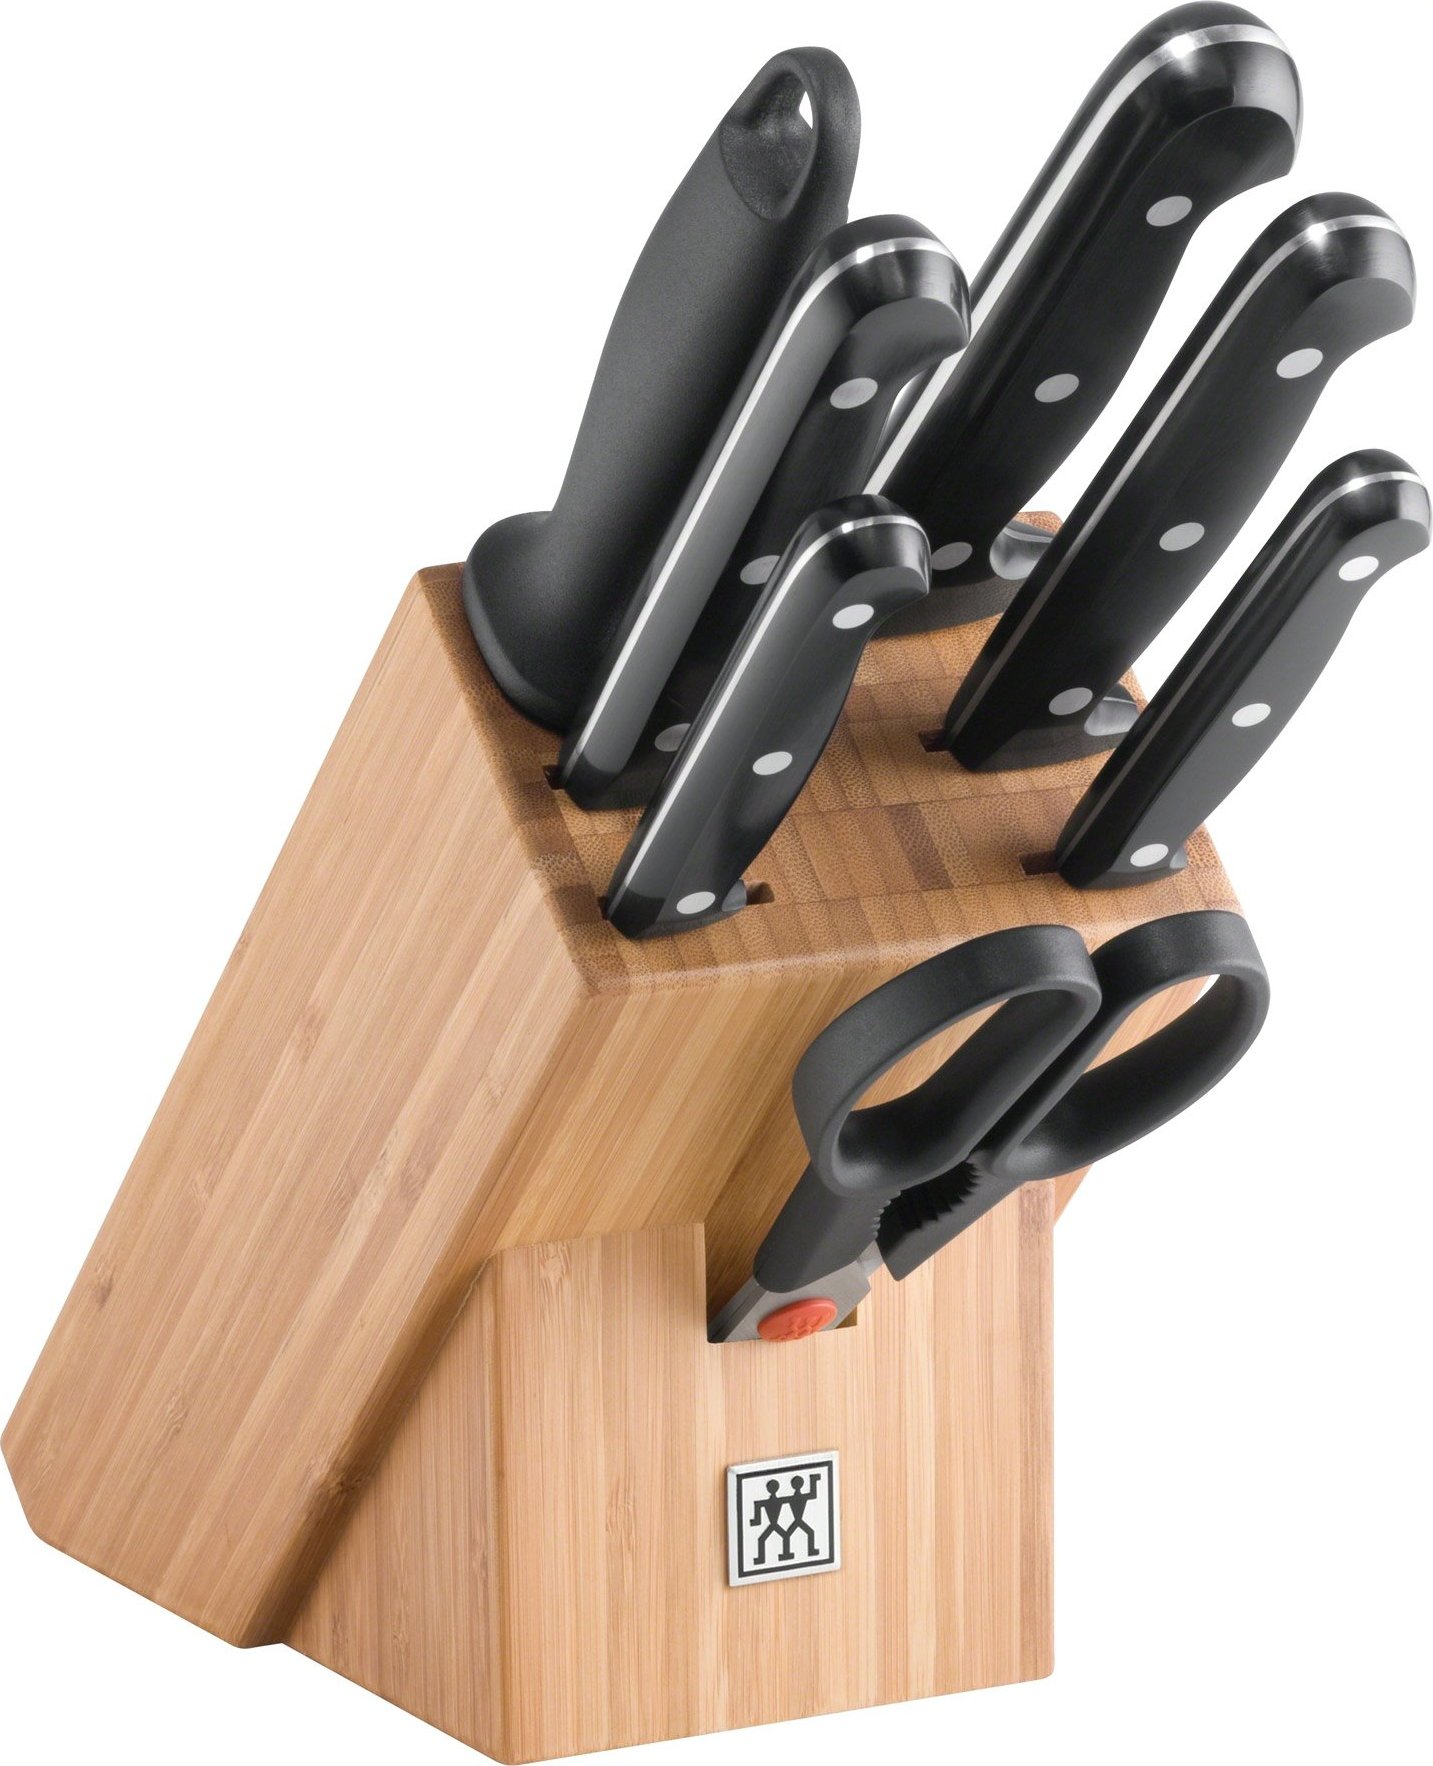 https://3fa-media.com/zwilling/zwilling-zwilling-twin-chef-knife-block-with-five-knives-with-sharpener-and-scissors__34931003-b-s2500x2500.jpg